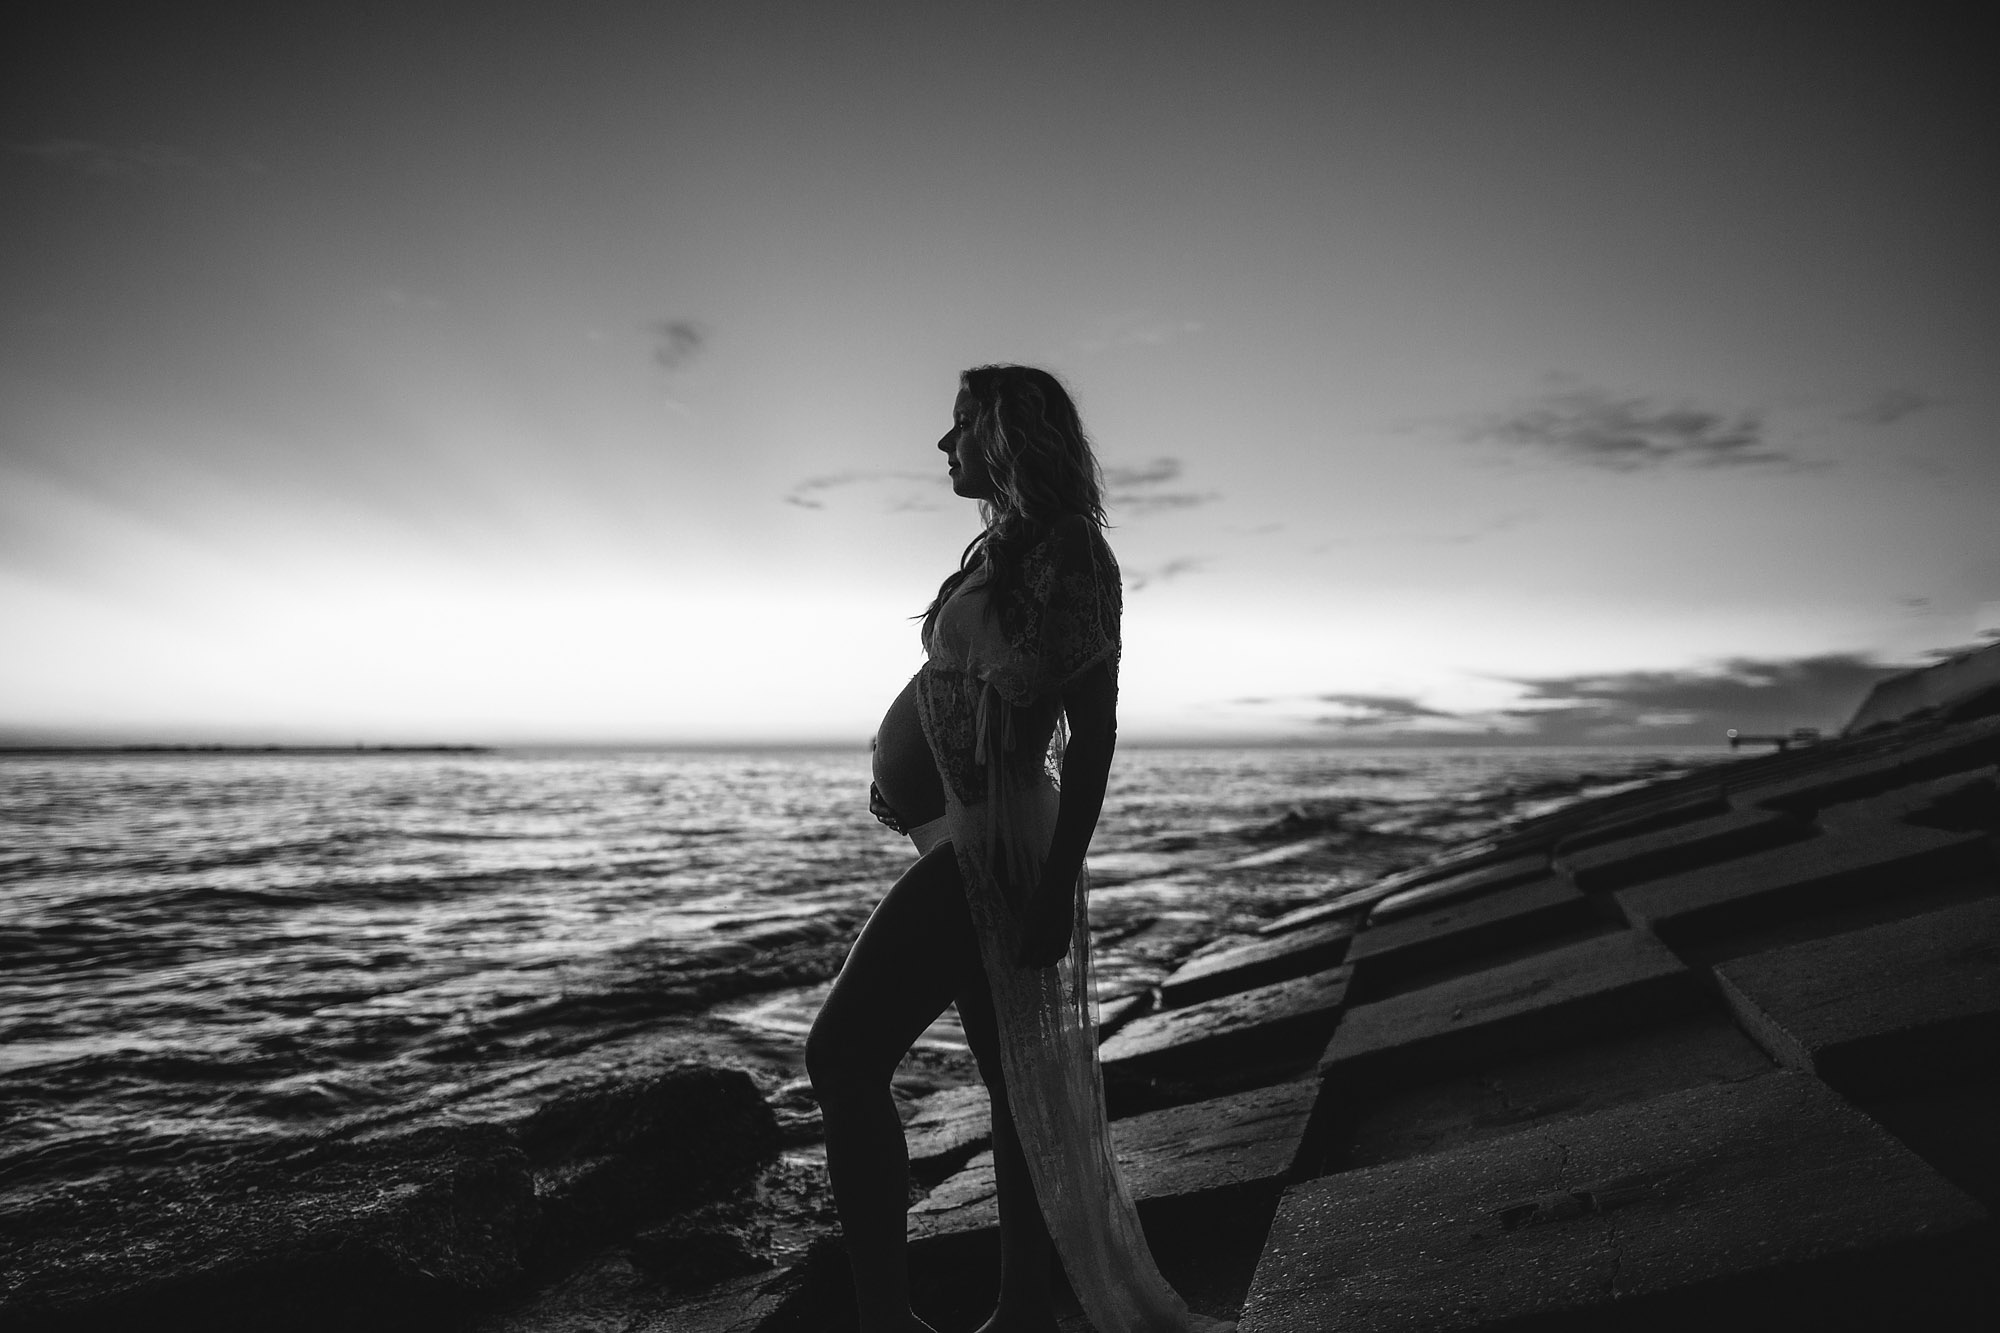  maternity pictures in water, beach maternity photographer